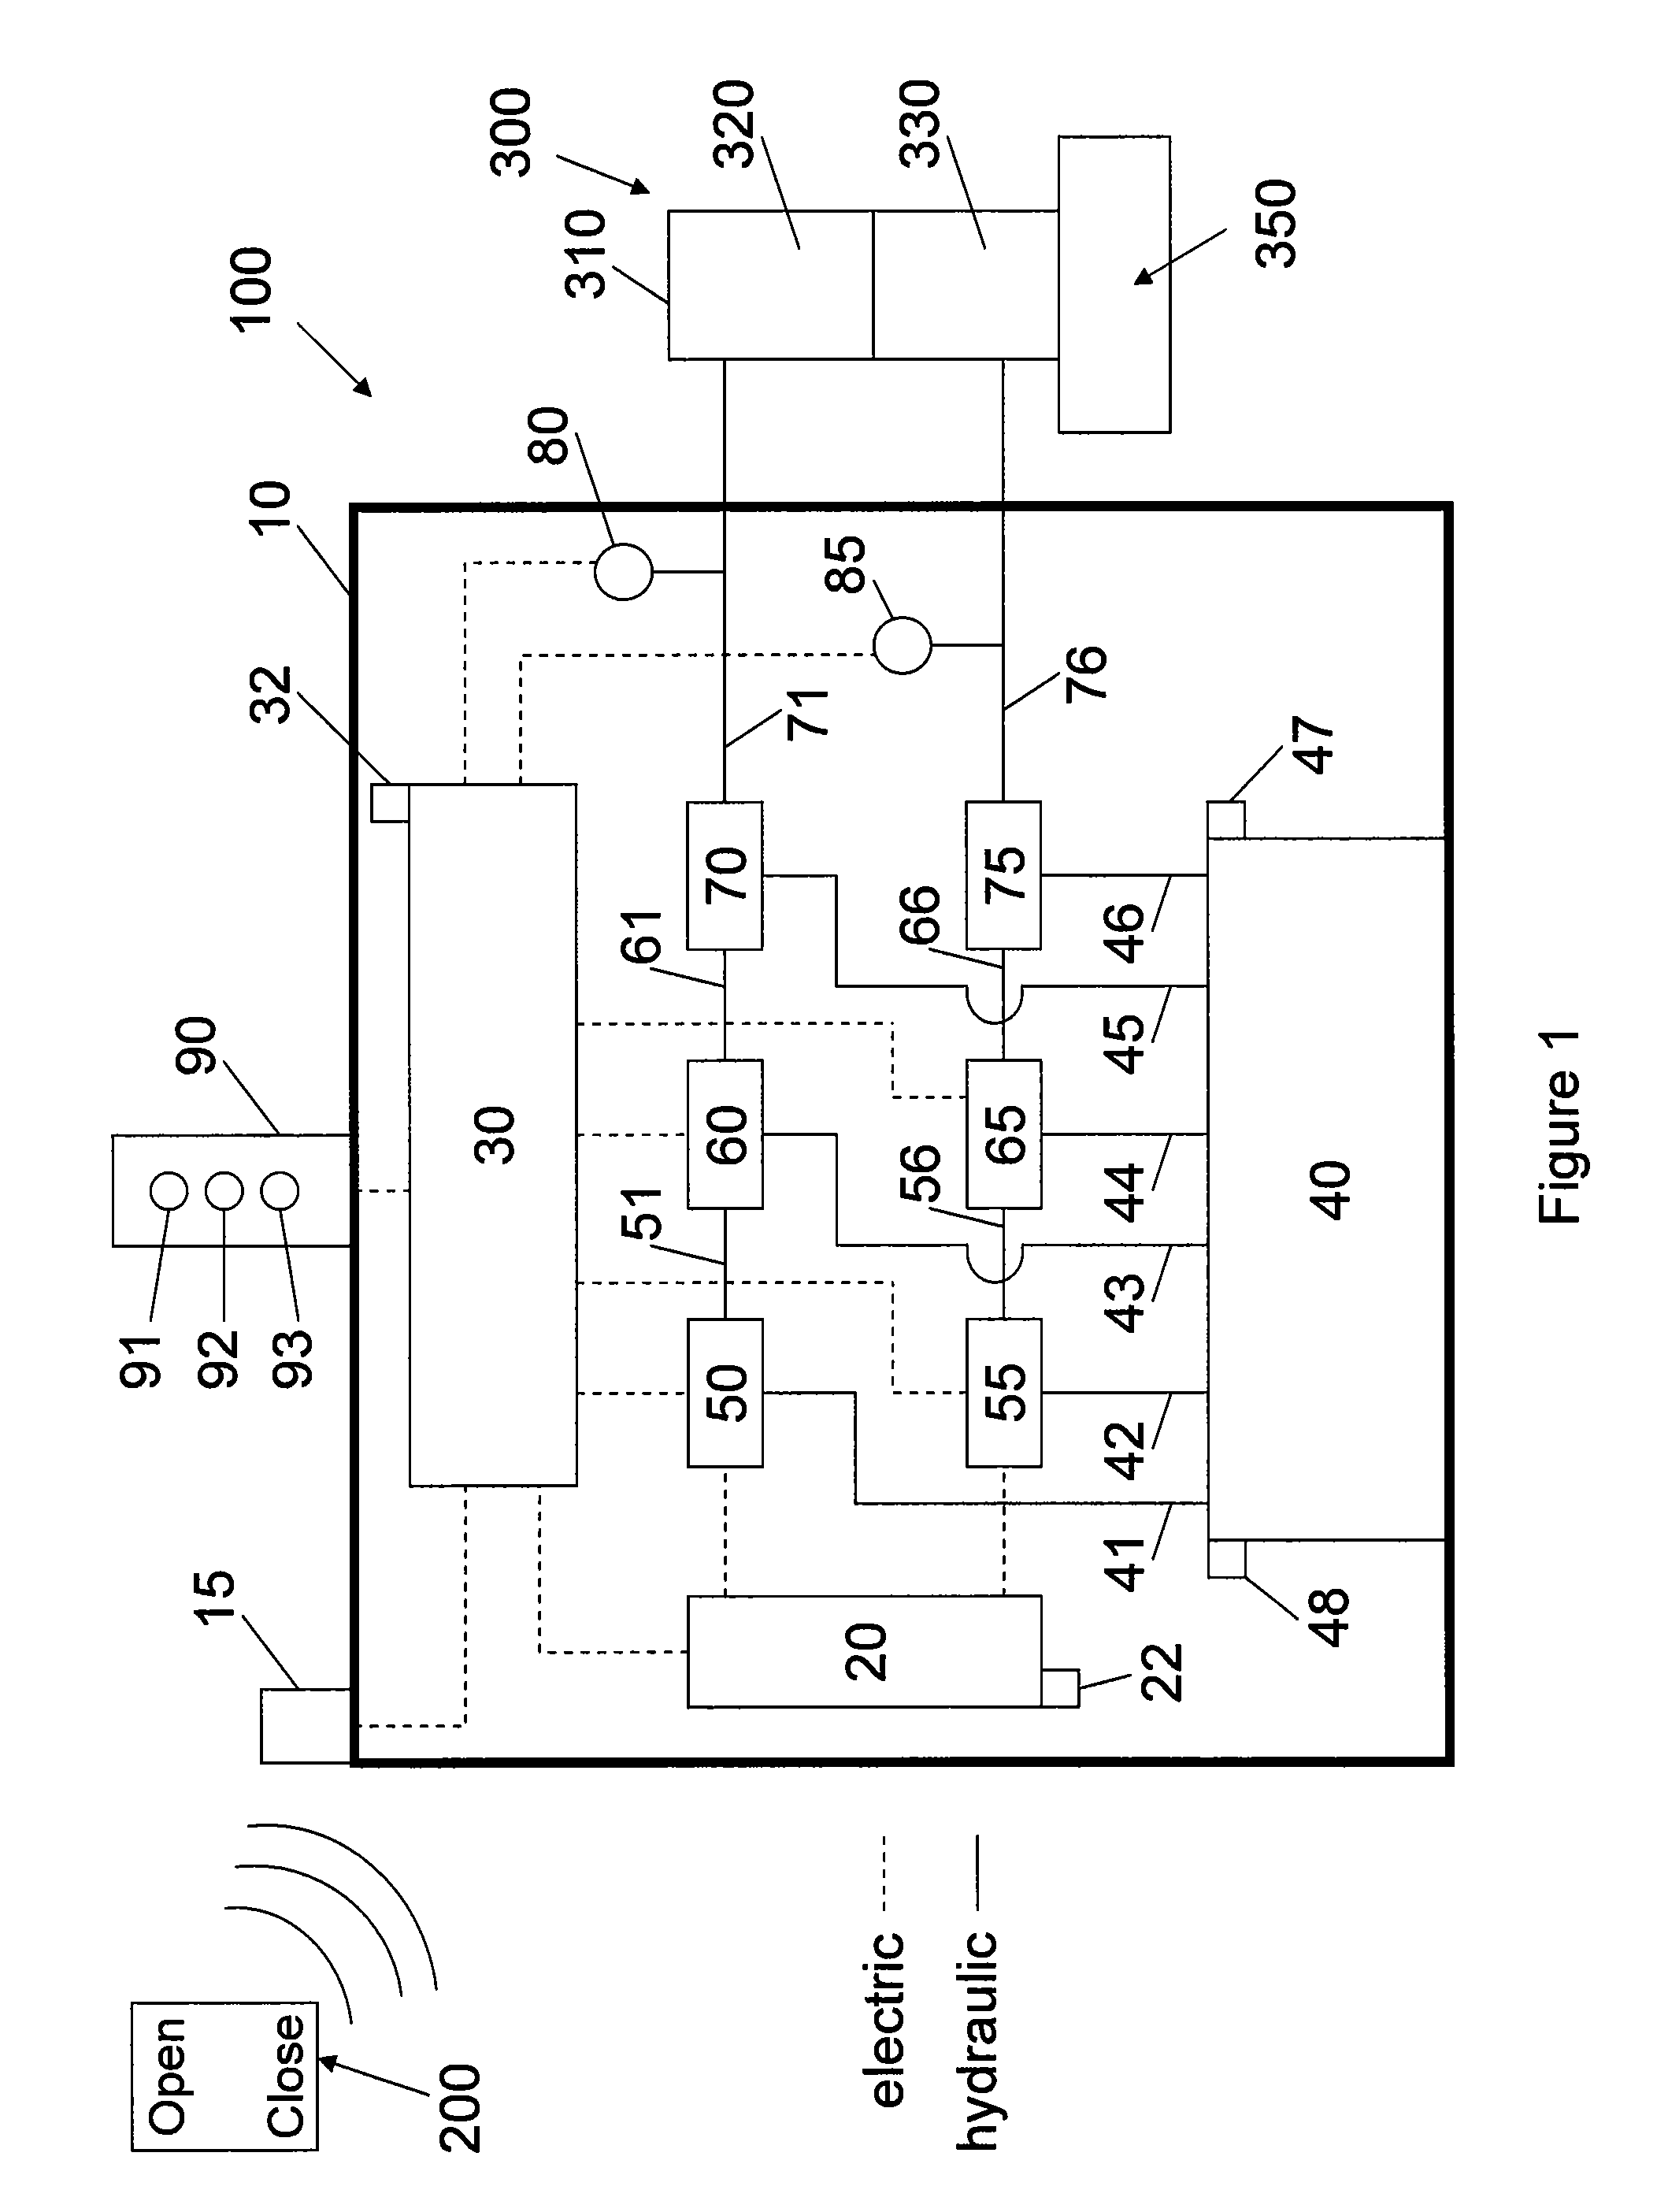 Valve actuator control system and method of use